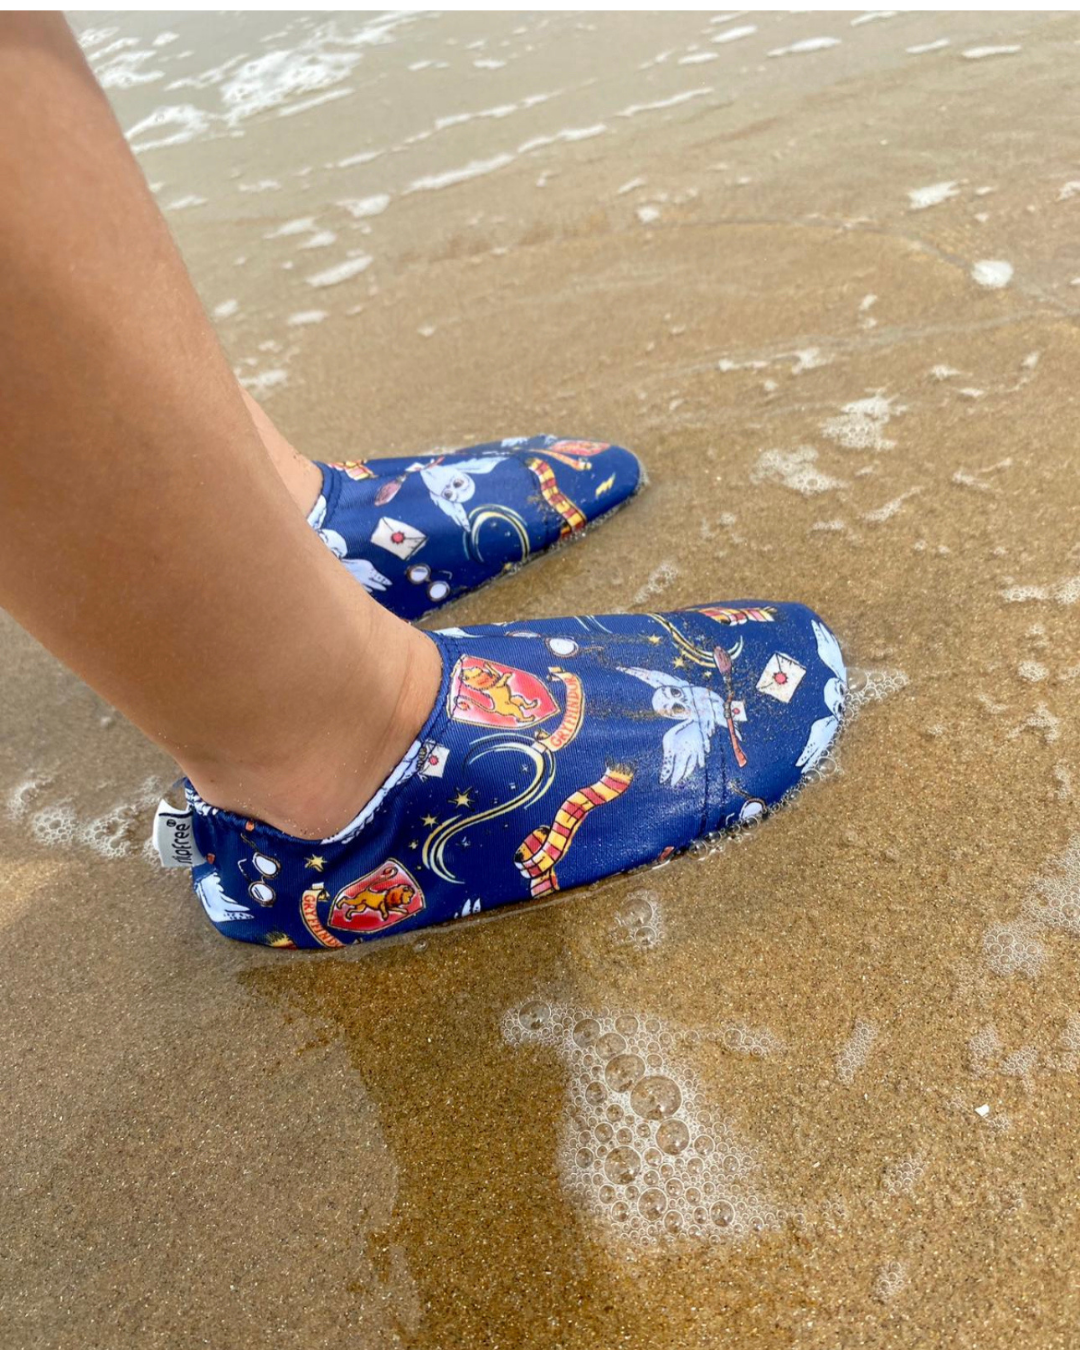 A unisex non slip shoe by Slipfree in colab with Warner Brothers, style Hedwig, in Harry Potter Owl print. Lifestyle image of feet in the sea.